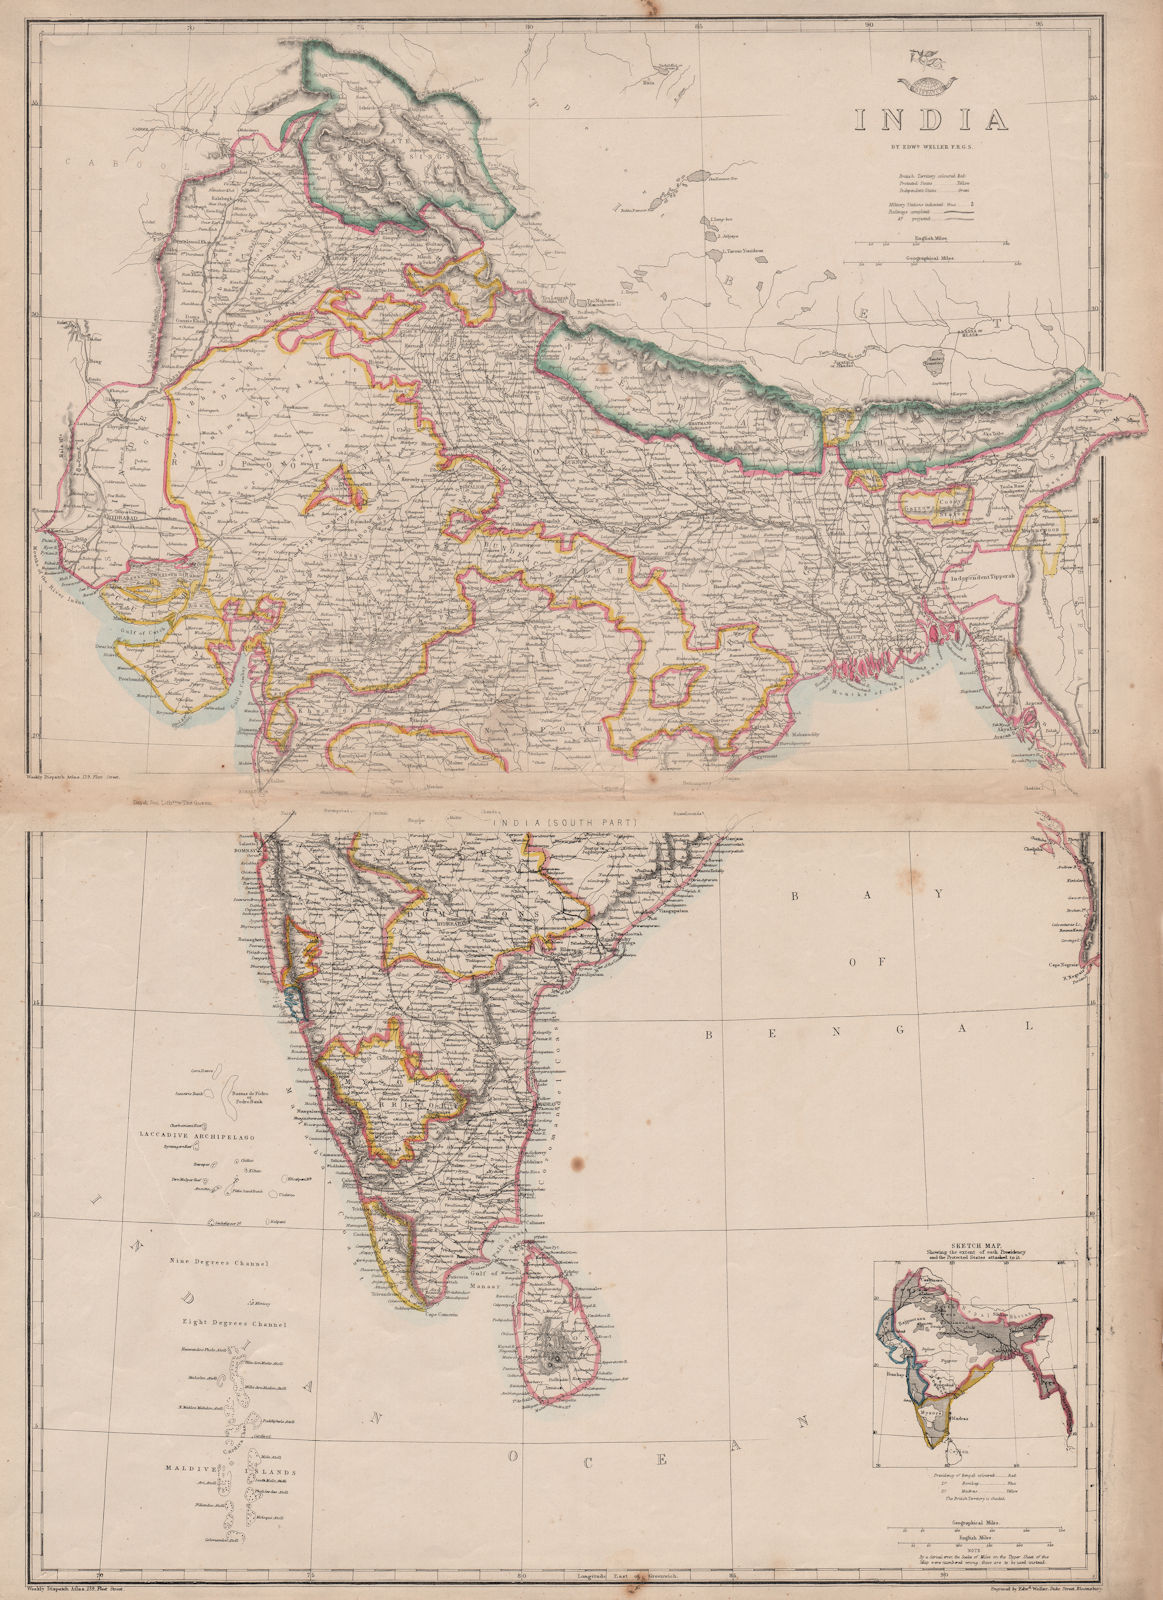 INDIA British/protected/ind states.Completed & planned railways.WELLER 1863 map